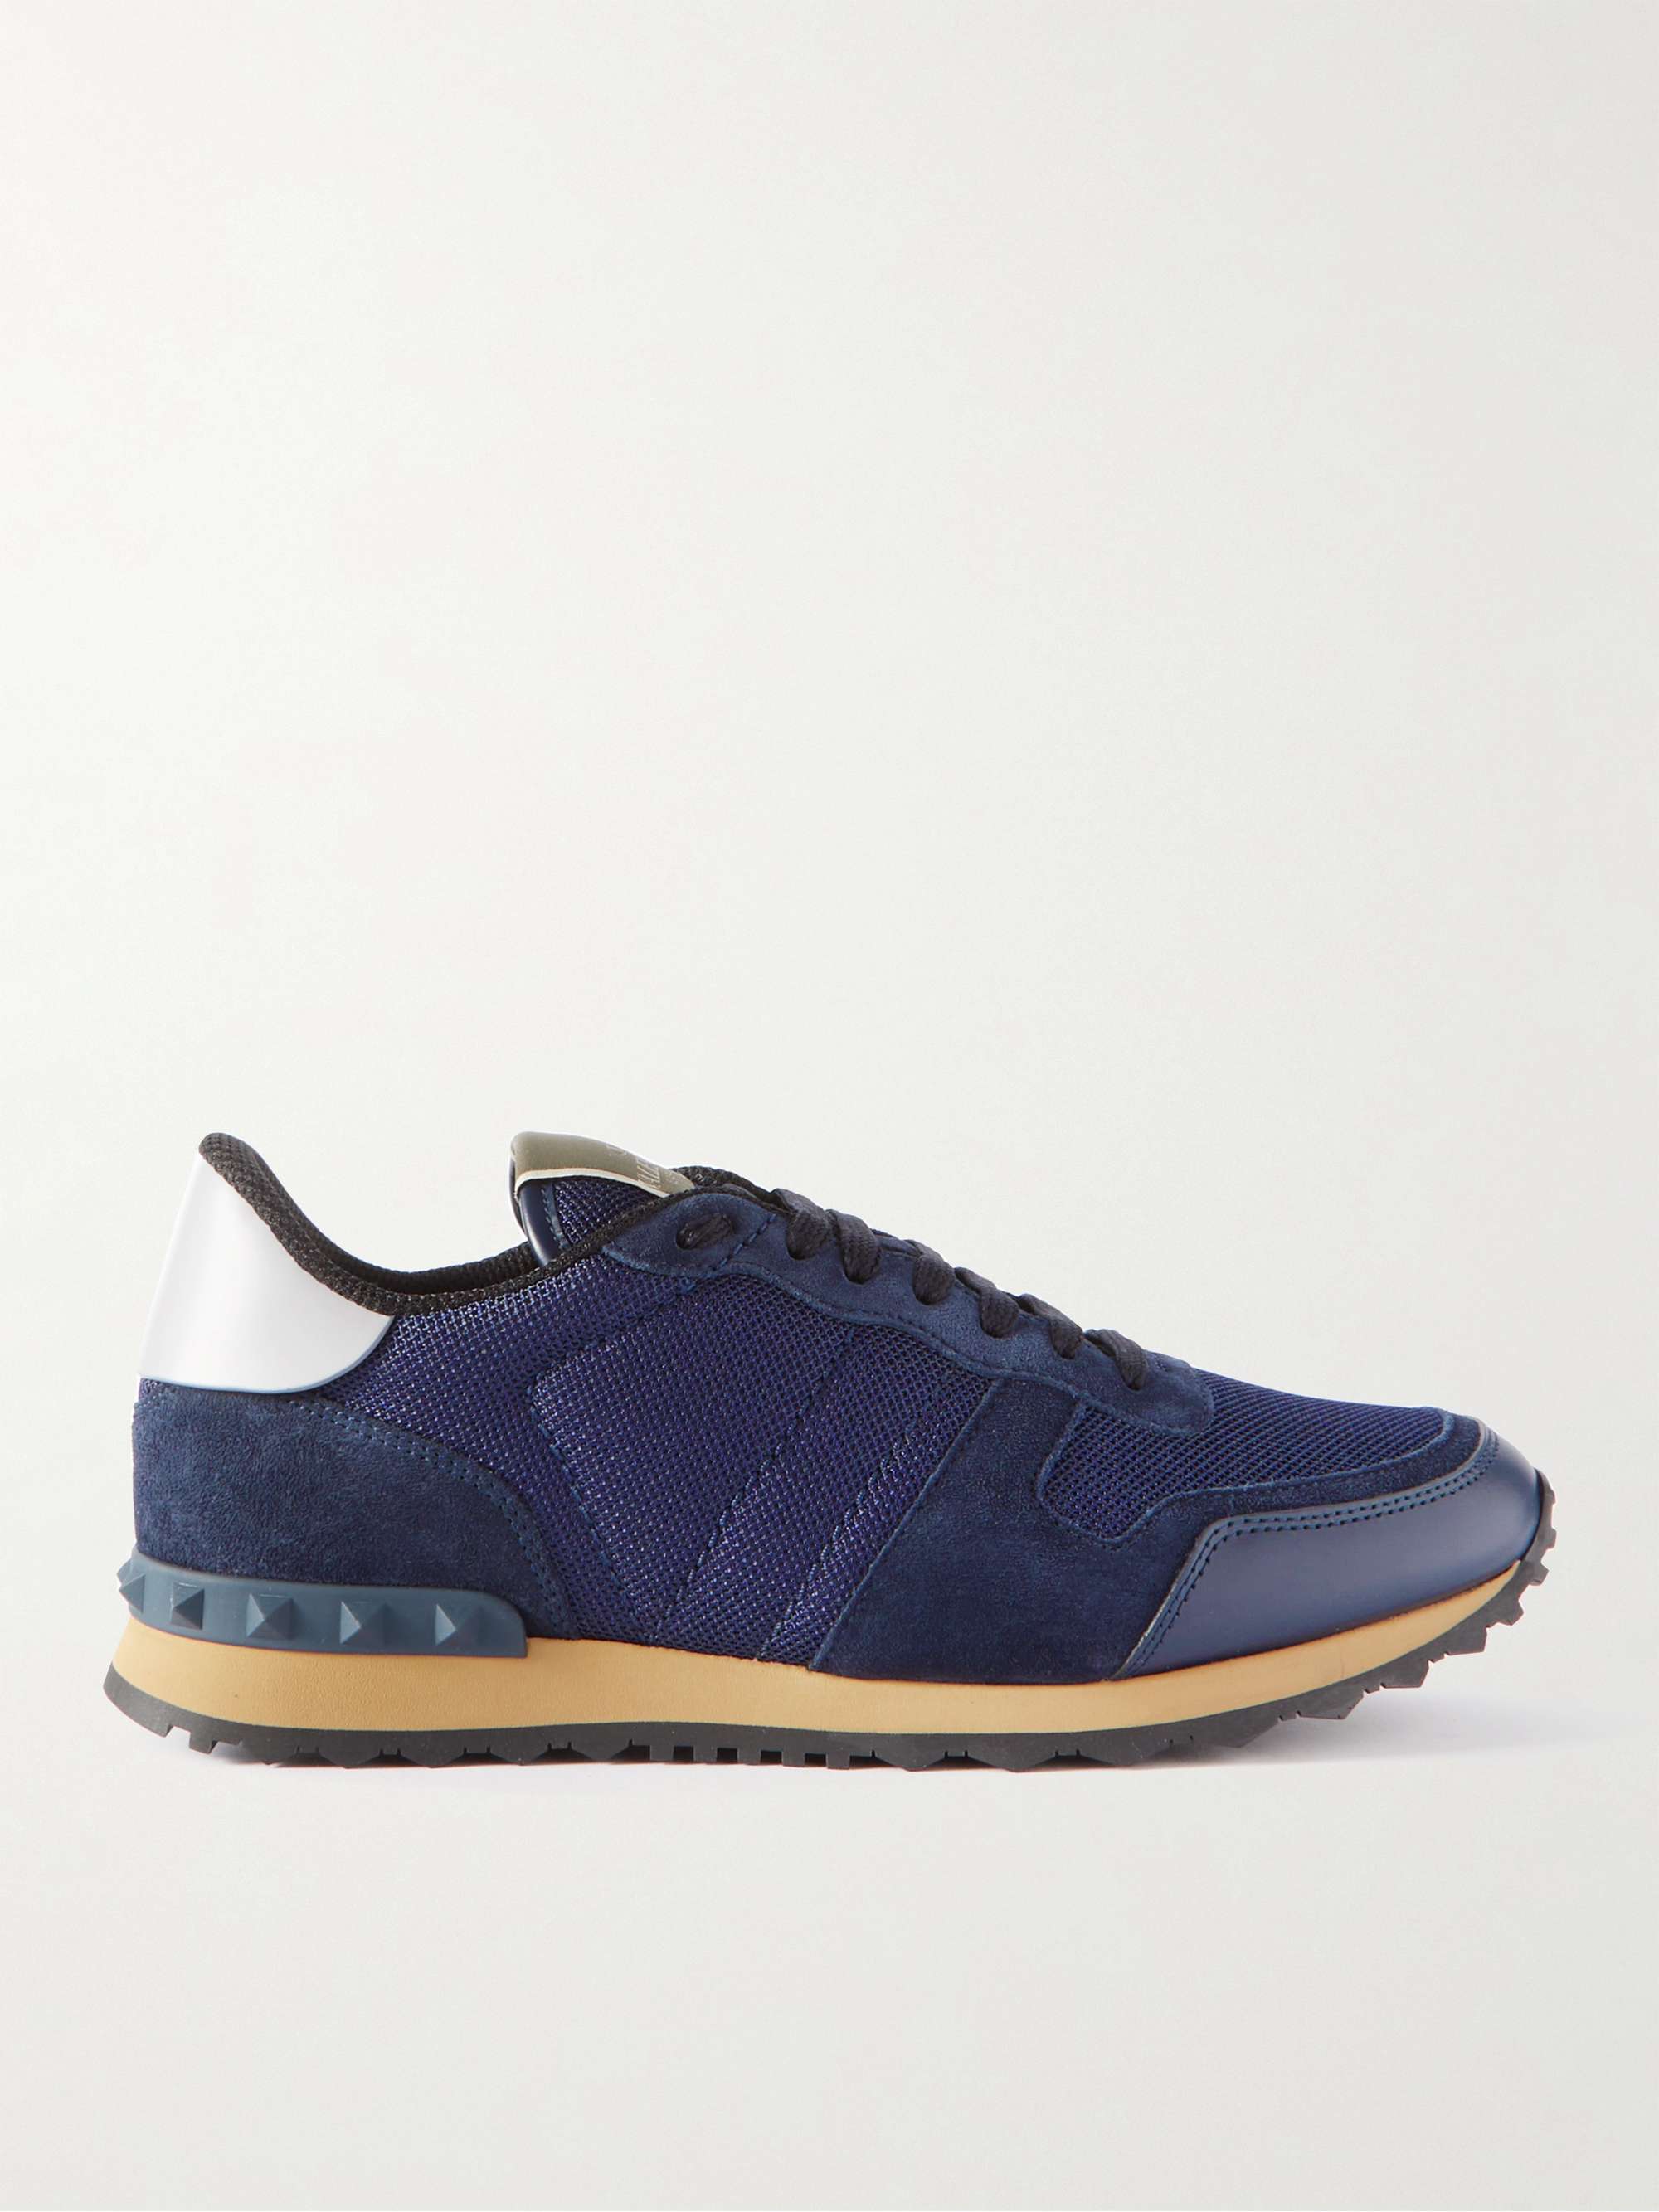 VALENTINO Valentino Garavani Rockrunner Leather-Trimmed Suede and Mesh Sneakers